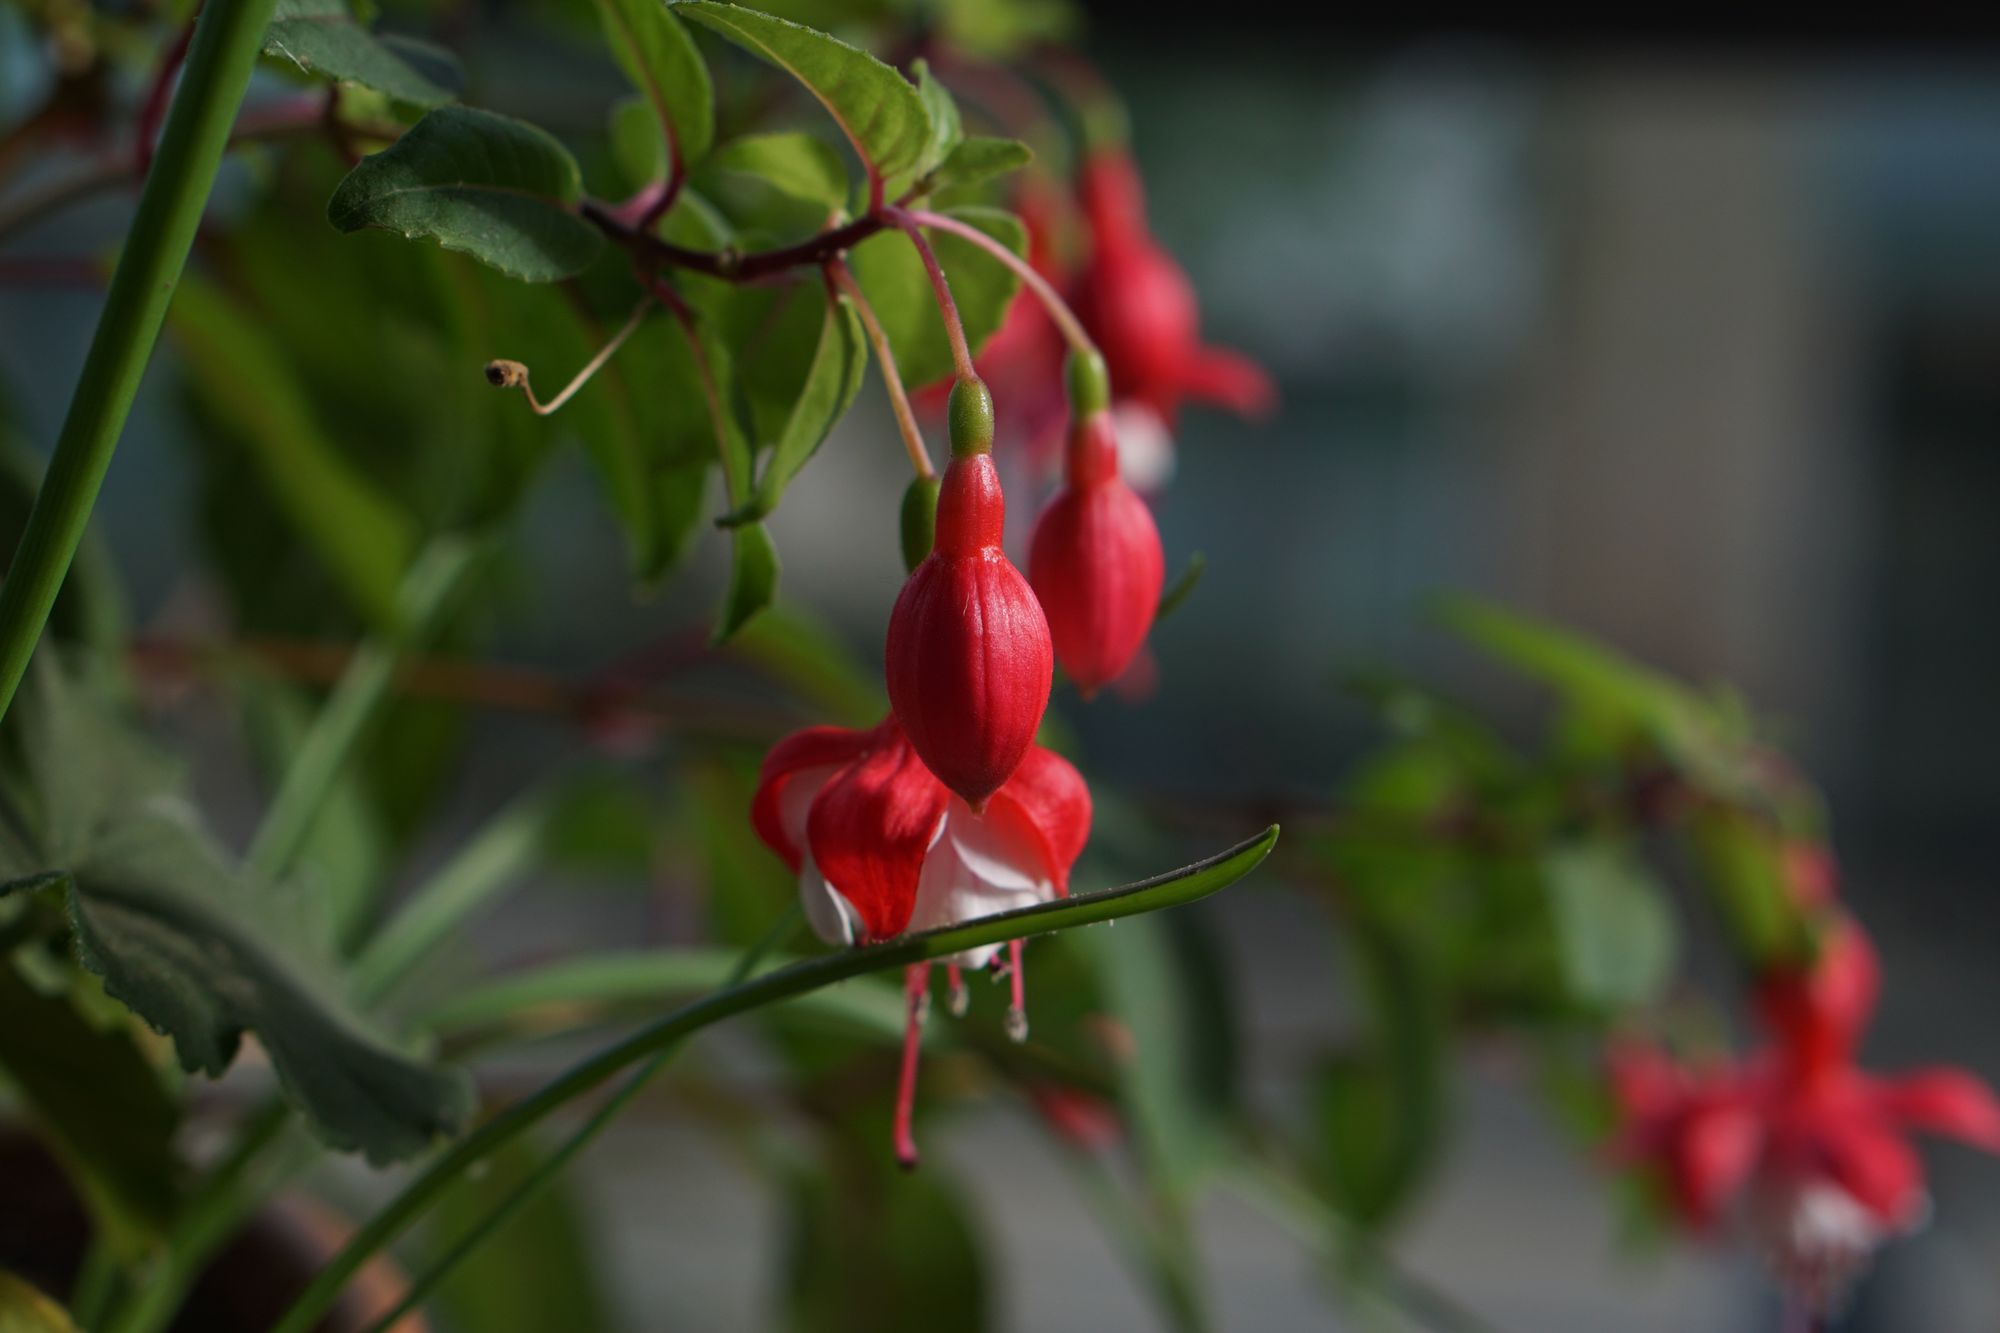 Fuchsia flowers (red outside, white inside) some open, some closed, hang from an erect fuchsia plant with various foliage around it.